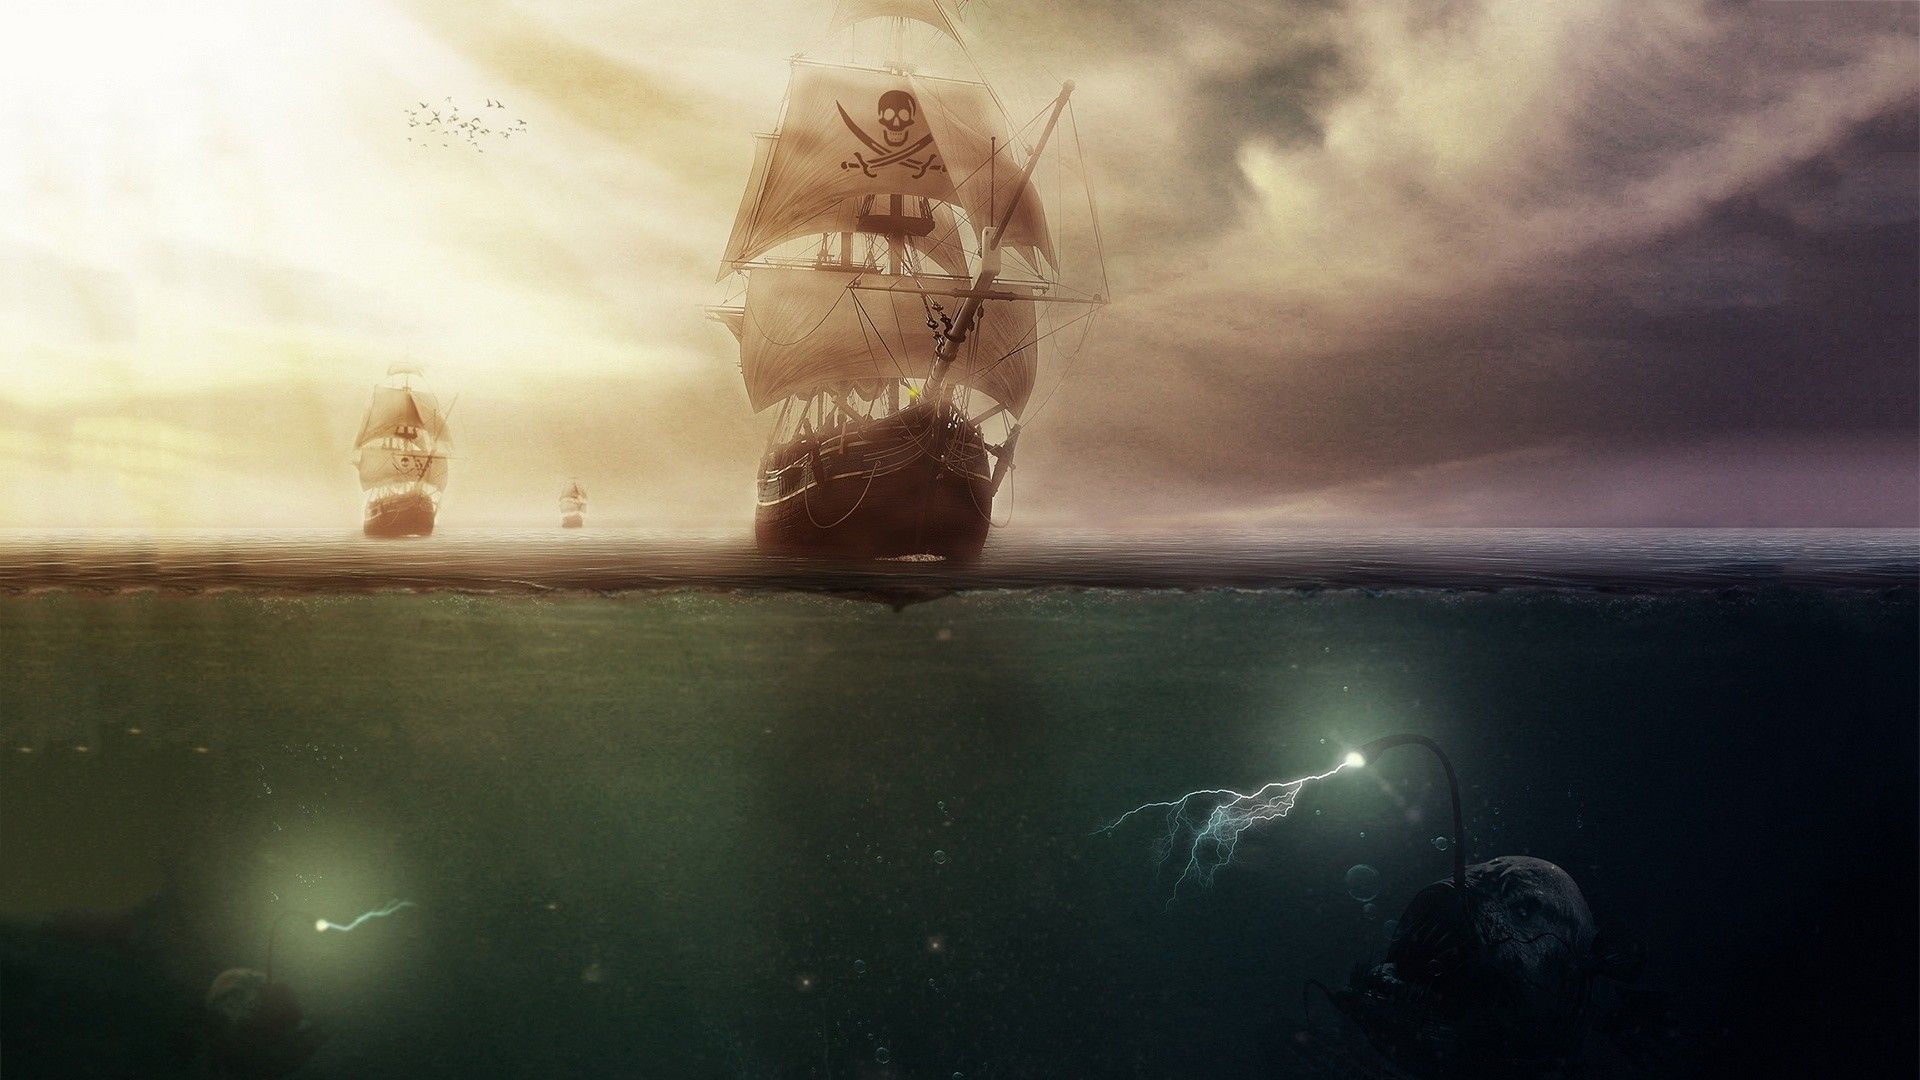 The dark and mysterious underwater world of the pirate ship wallpaper - Pirate